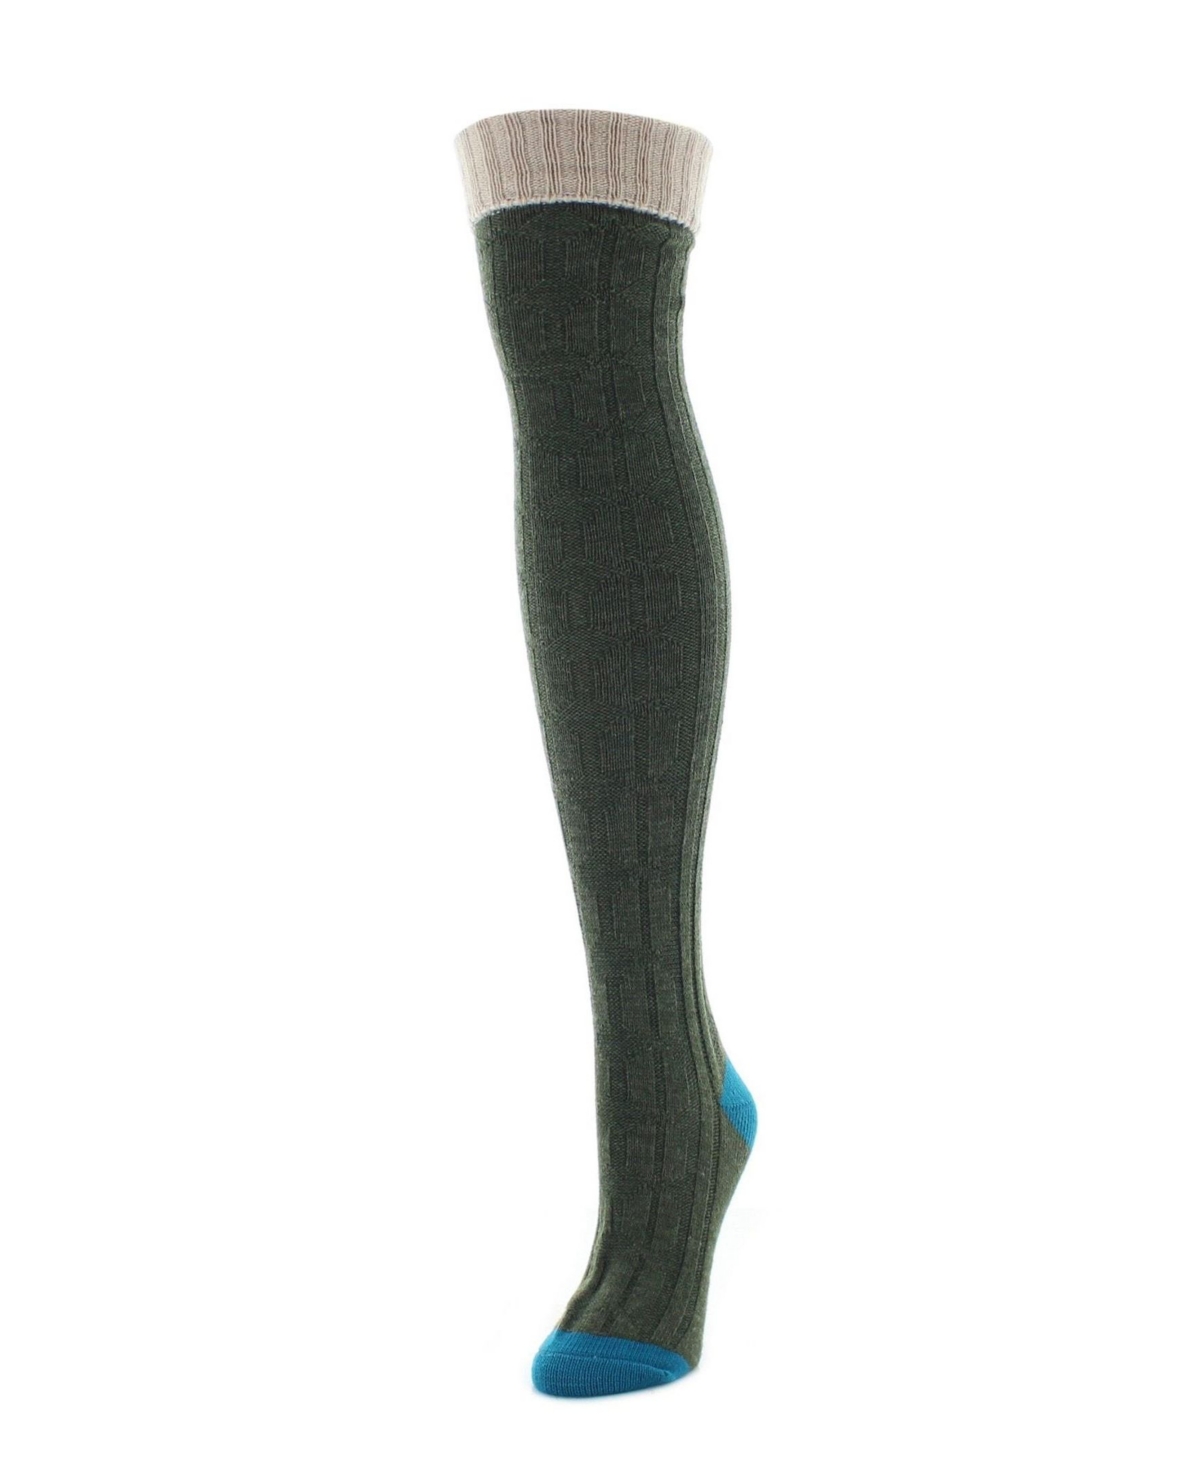 Women's Mixed Color Over The Knee Socks - Rosin